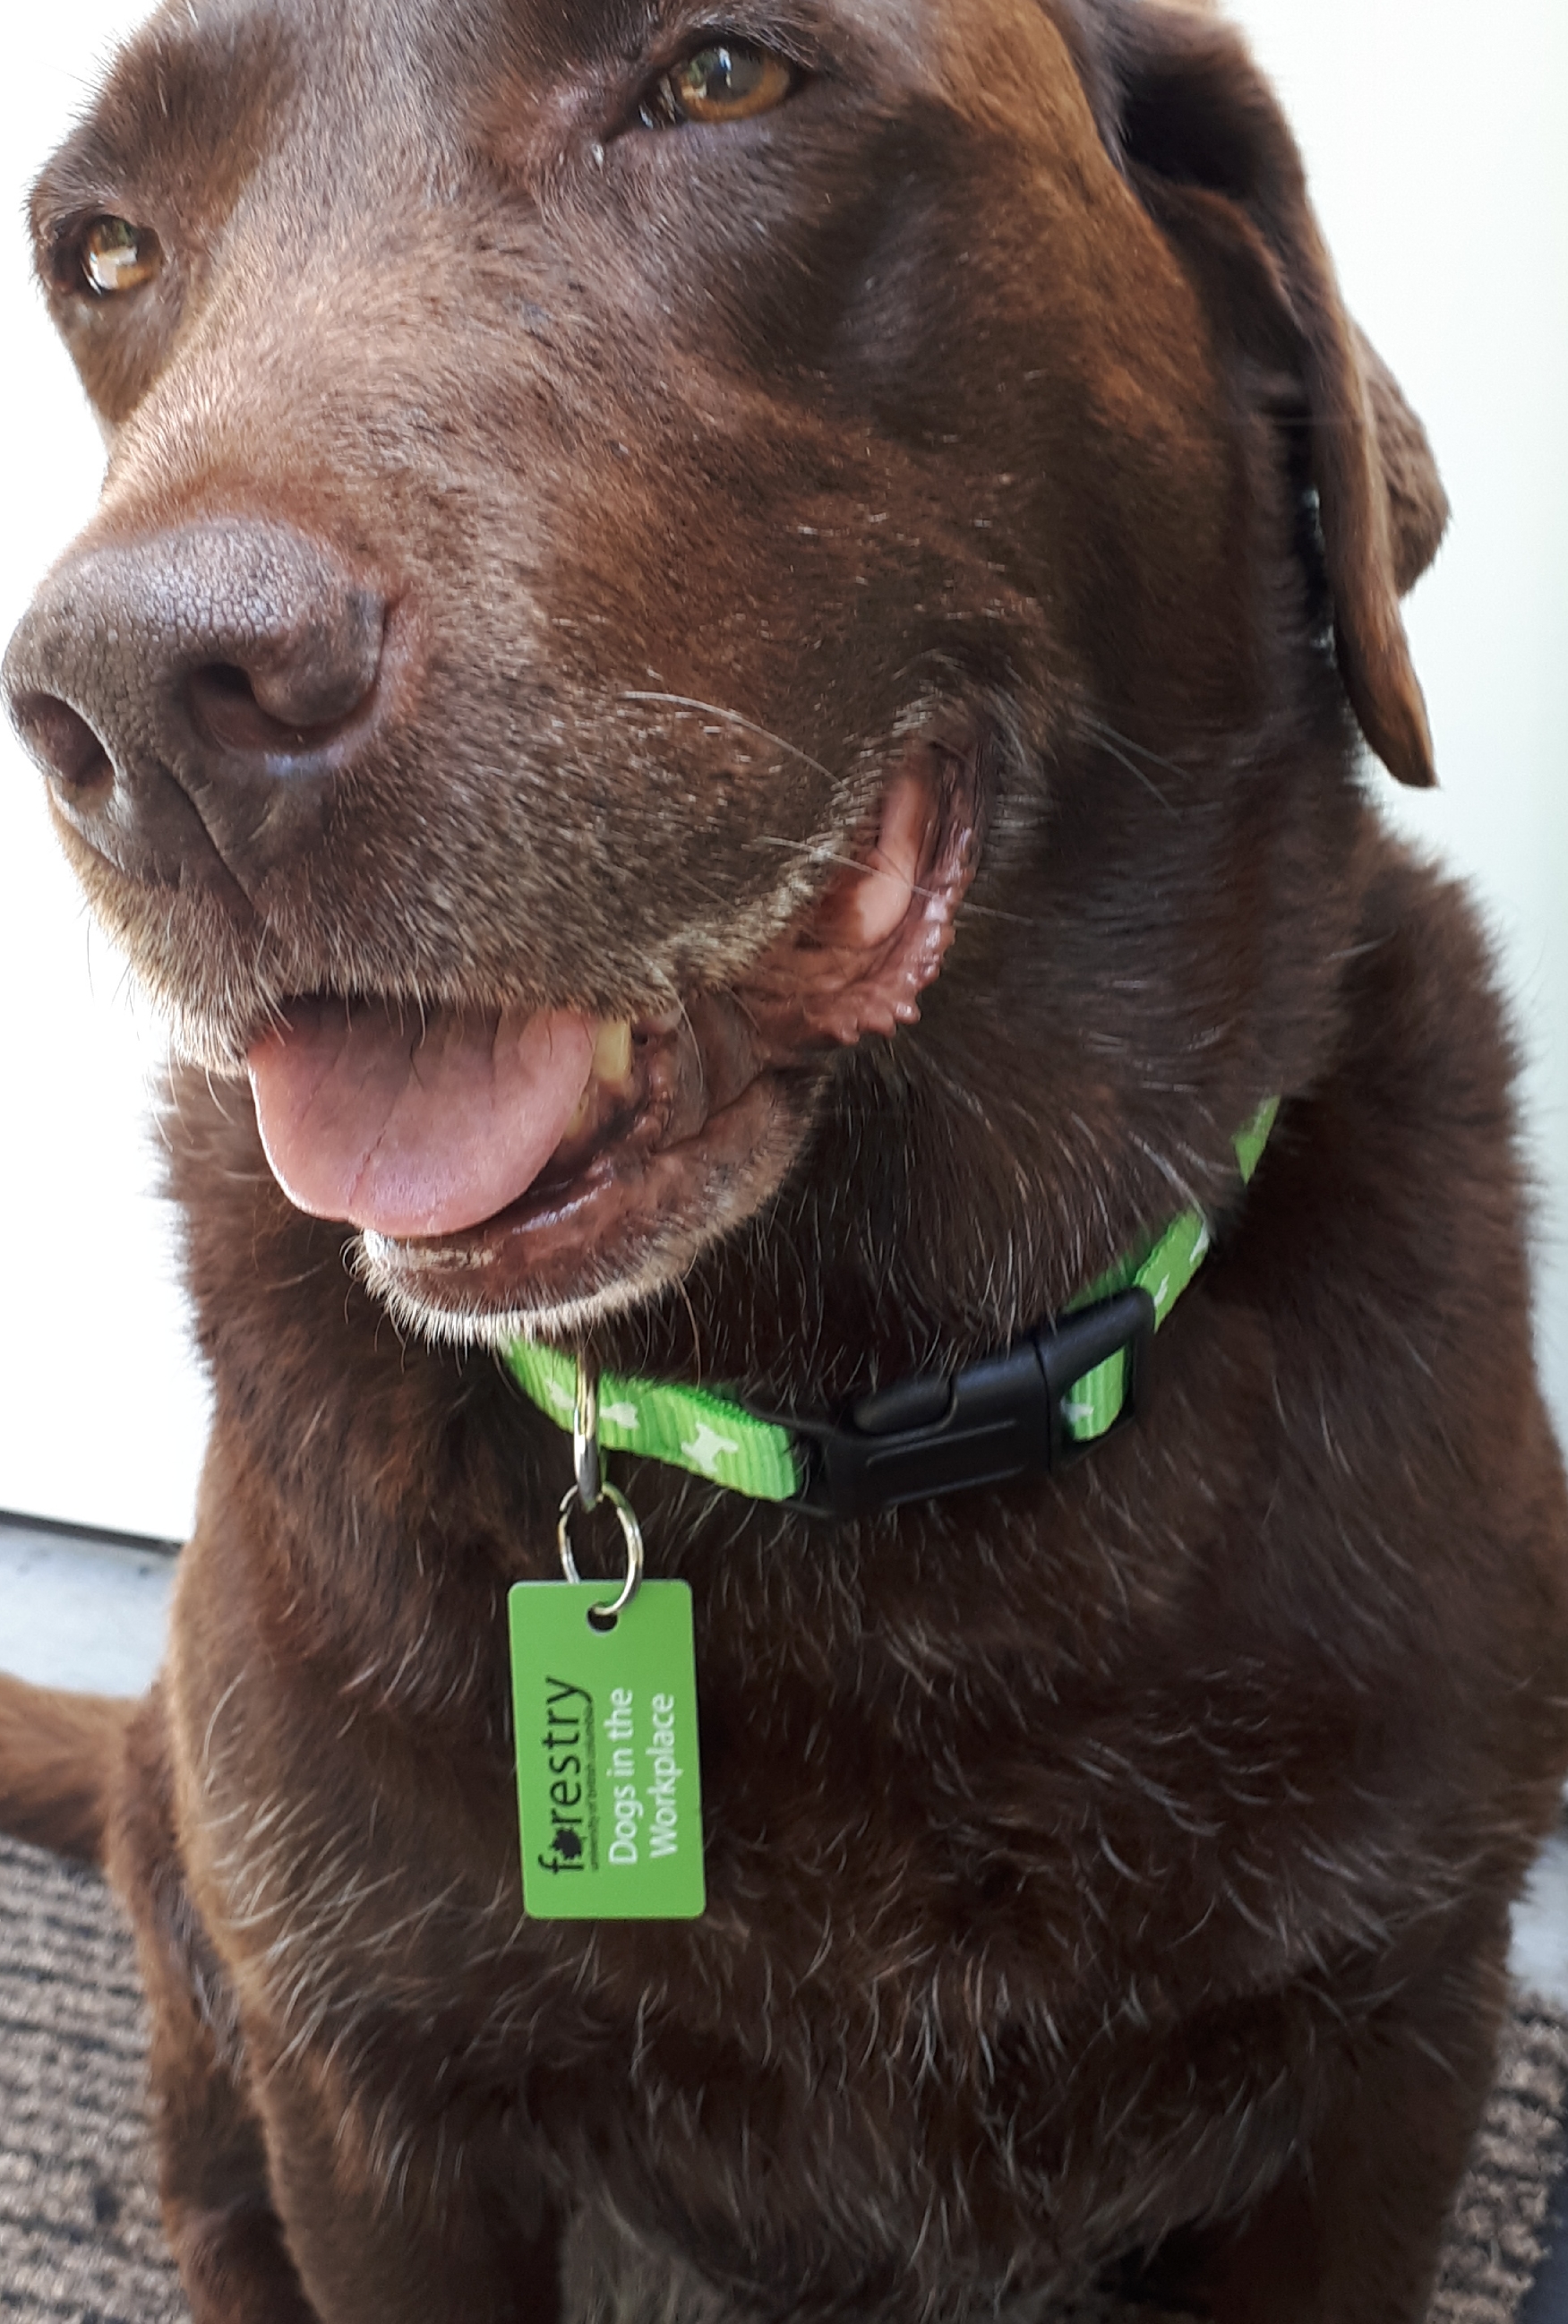 Tanka with UBC Forestry Dogs in the Workplace green dog tag